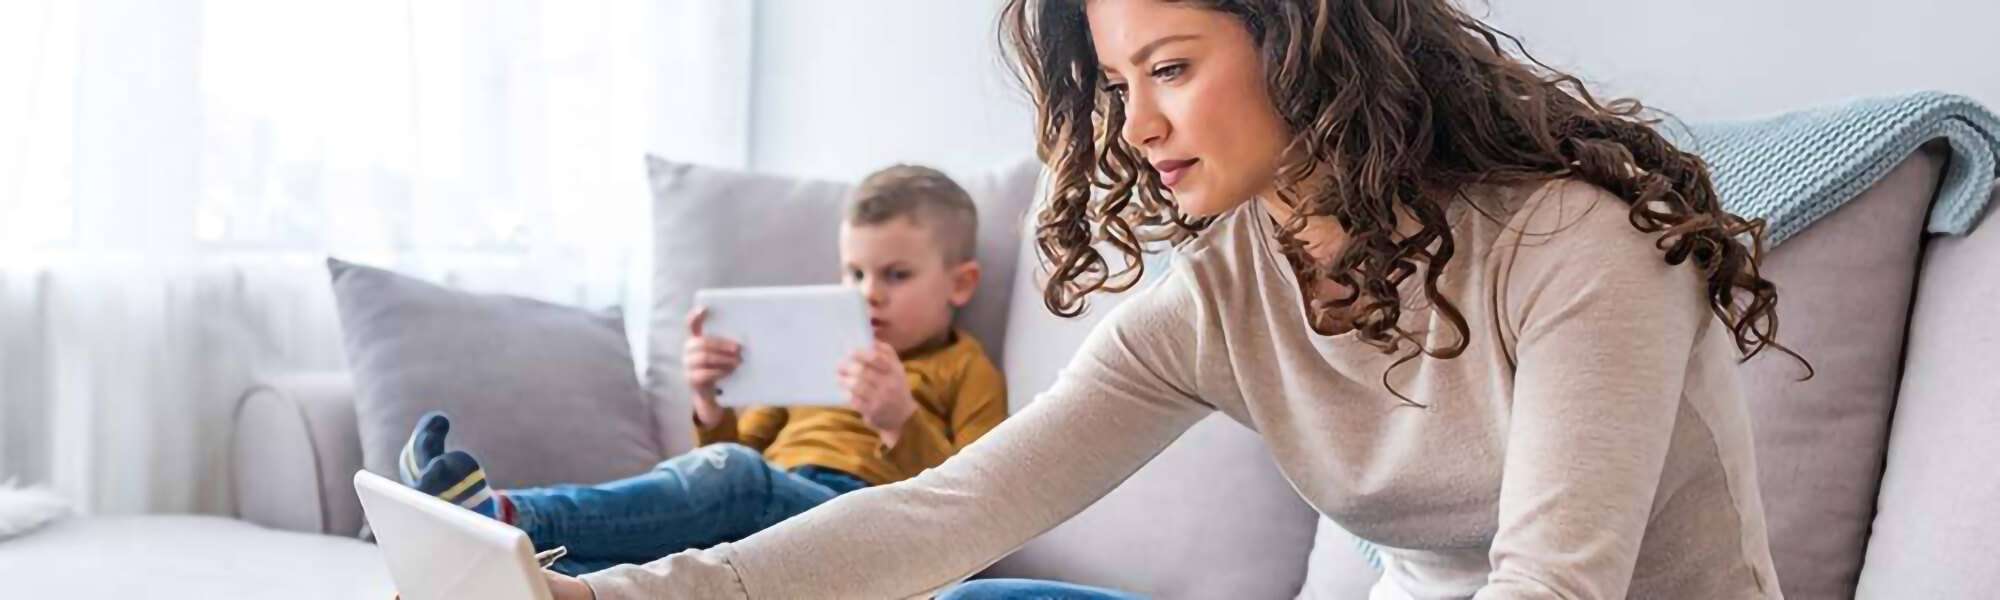 Family on couch with devices